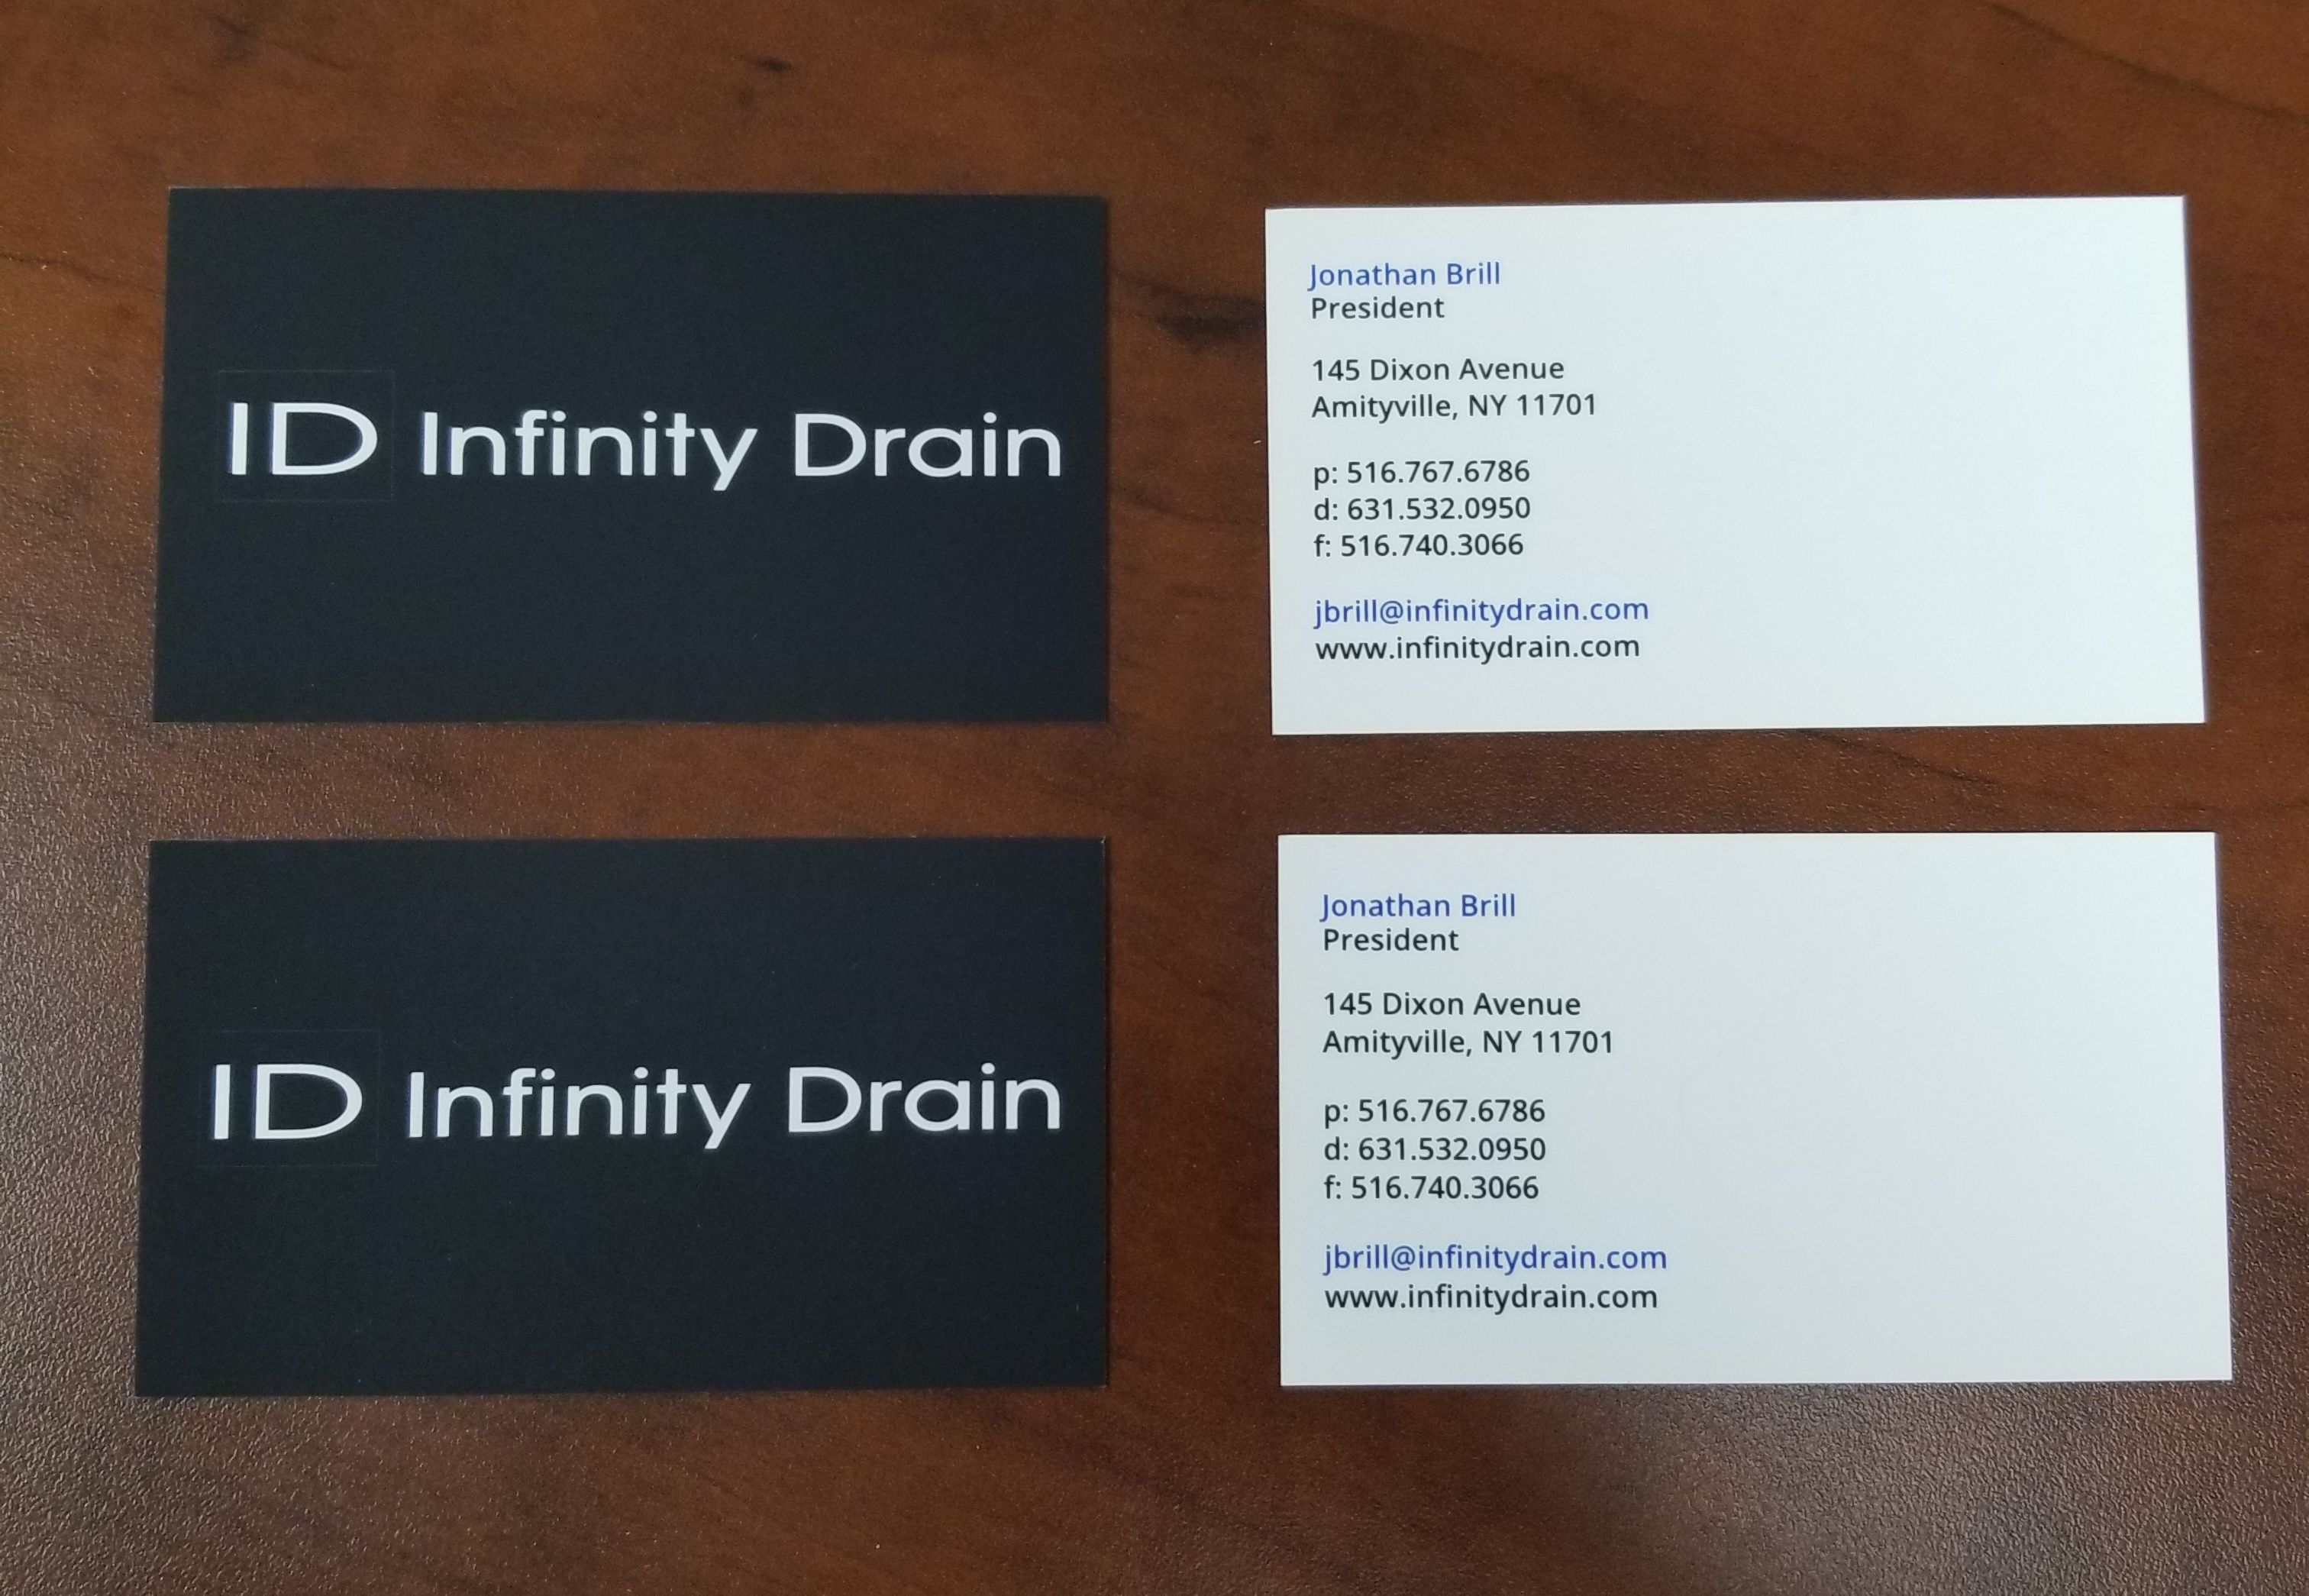 Soft Touch Laminate Business Cards